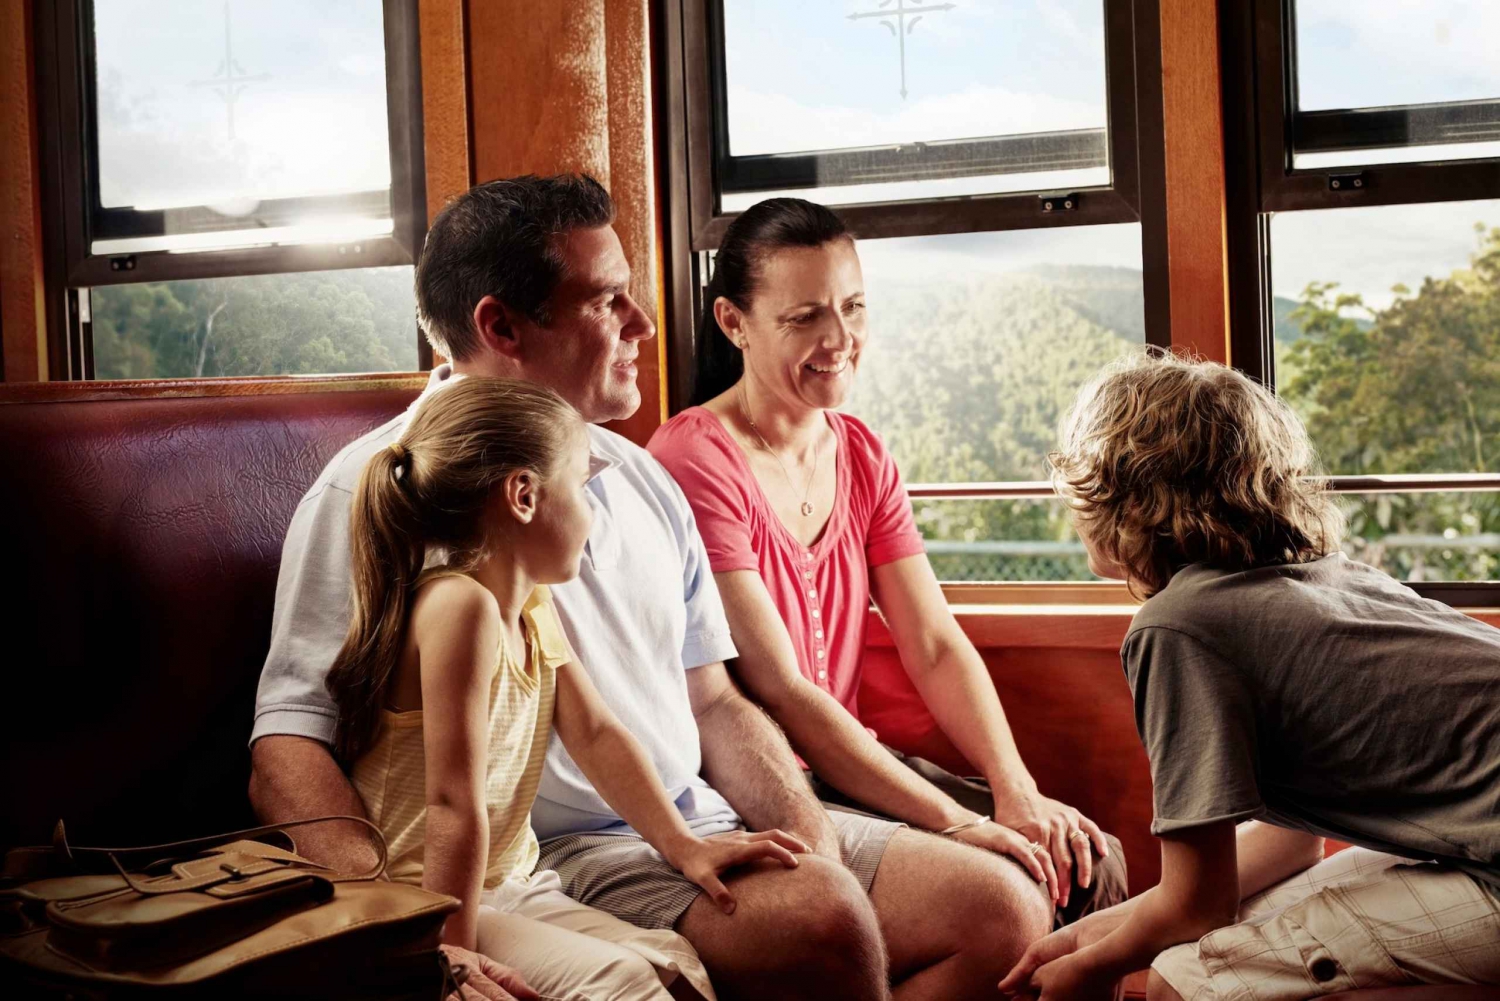 Cairns: Kuranda by bus and Scenic Rail Small Group Day Tour